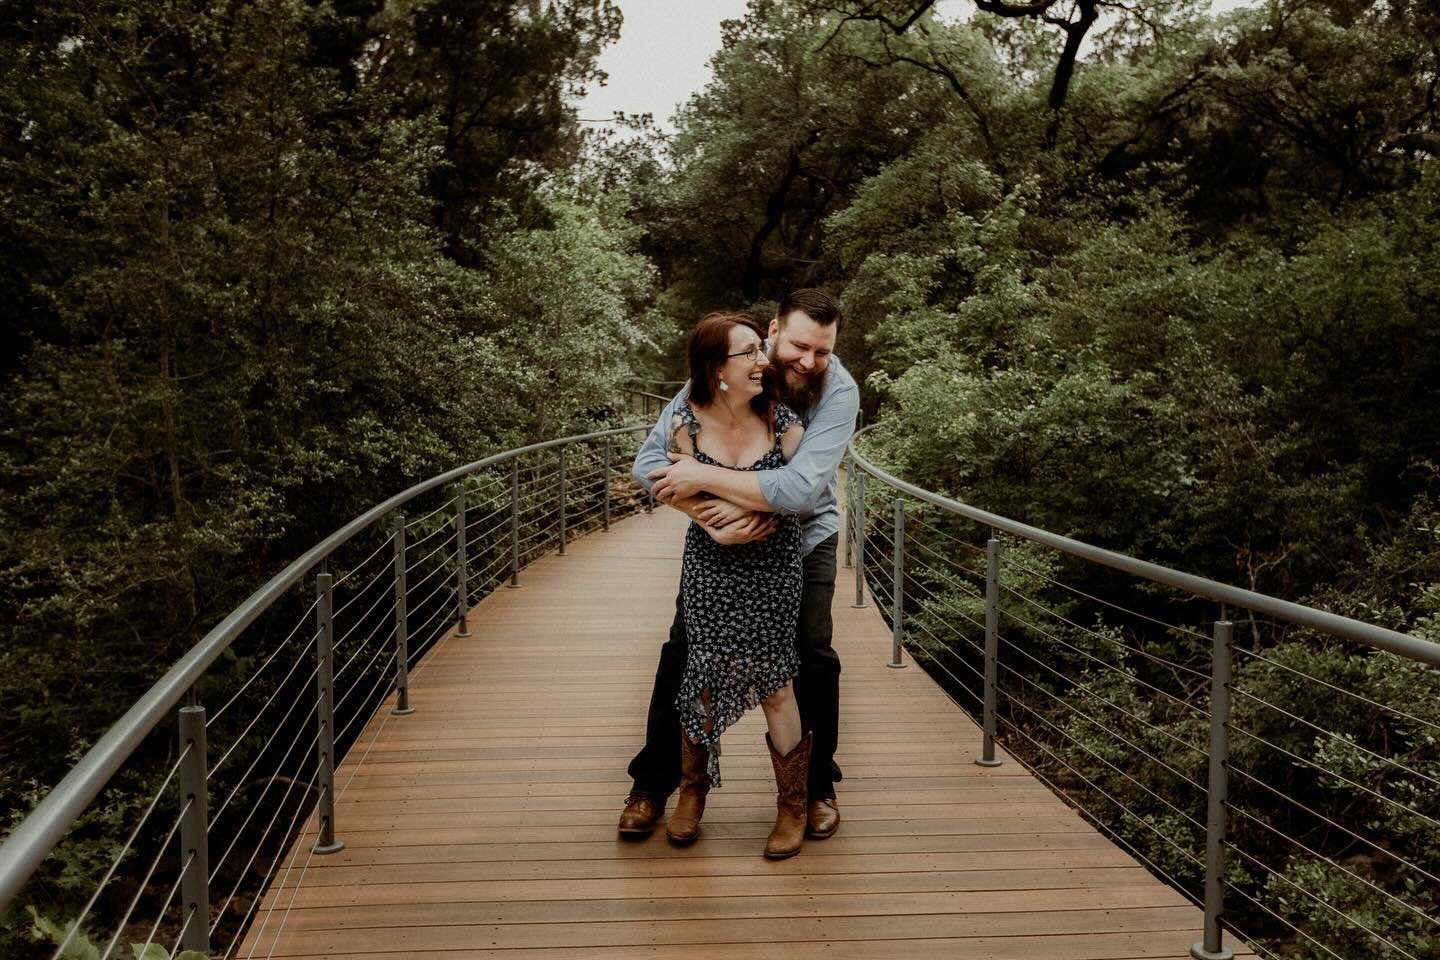 Shoutout to this sweet couple for enduring the humidity that day! Despite the weather, everything turned out well. Lots of love and giggles 💕 Venue: @wildflowercenter (Edited with our film/vintage editing style) #austinengagement #austinengagementph